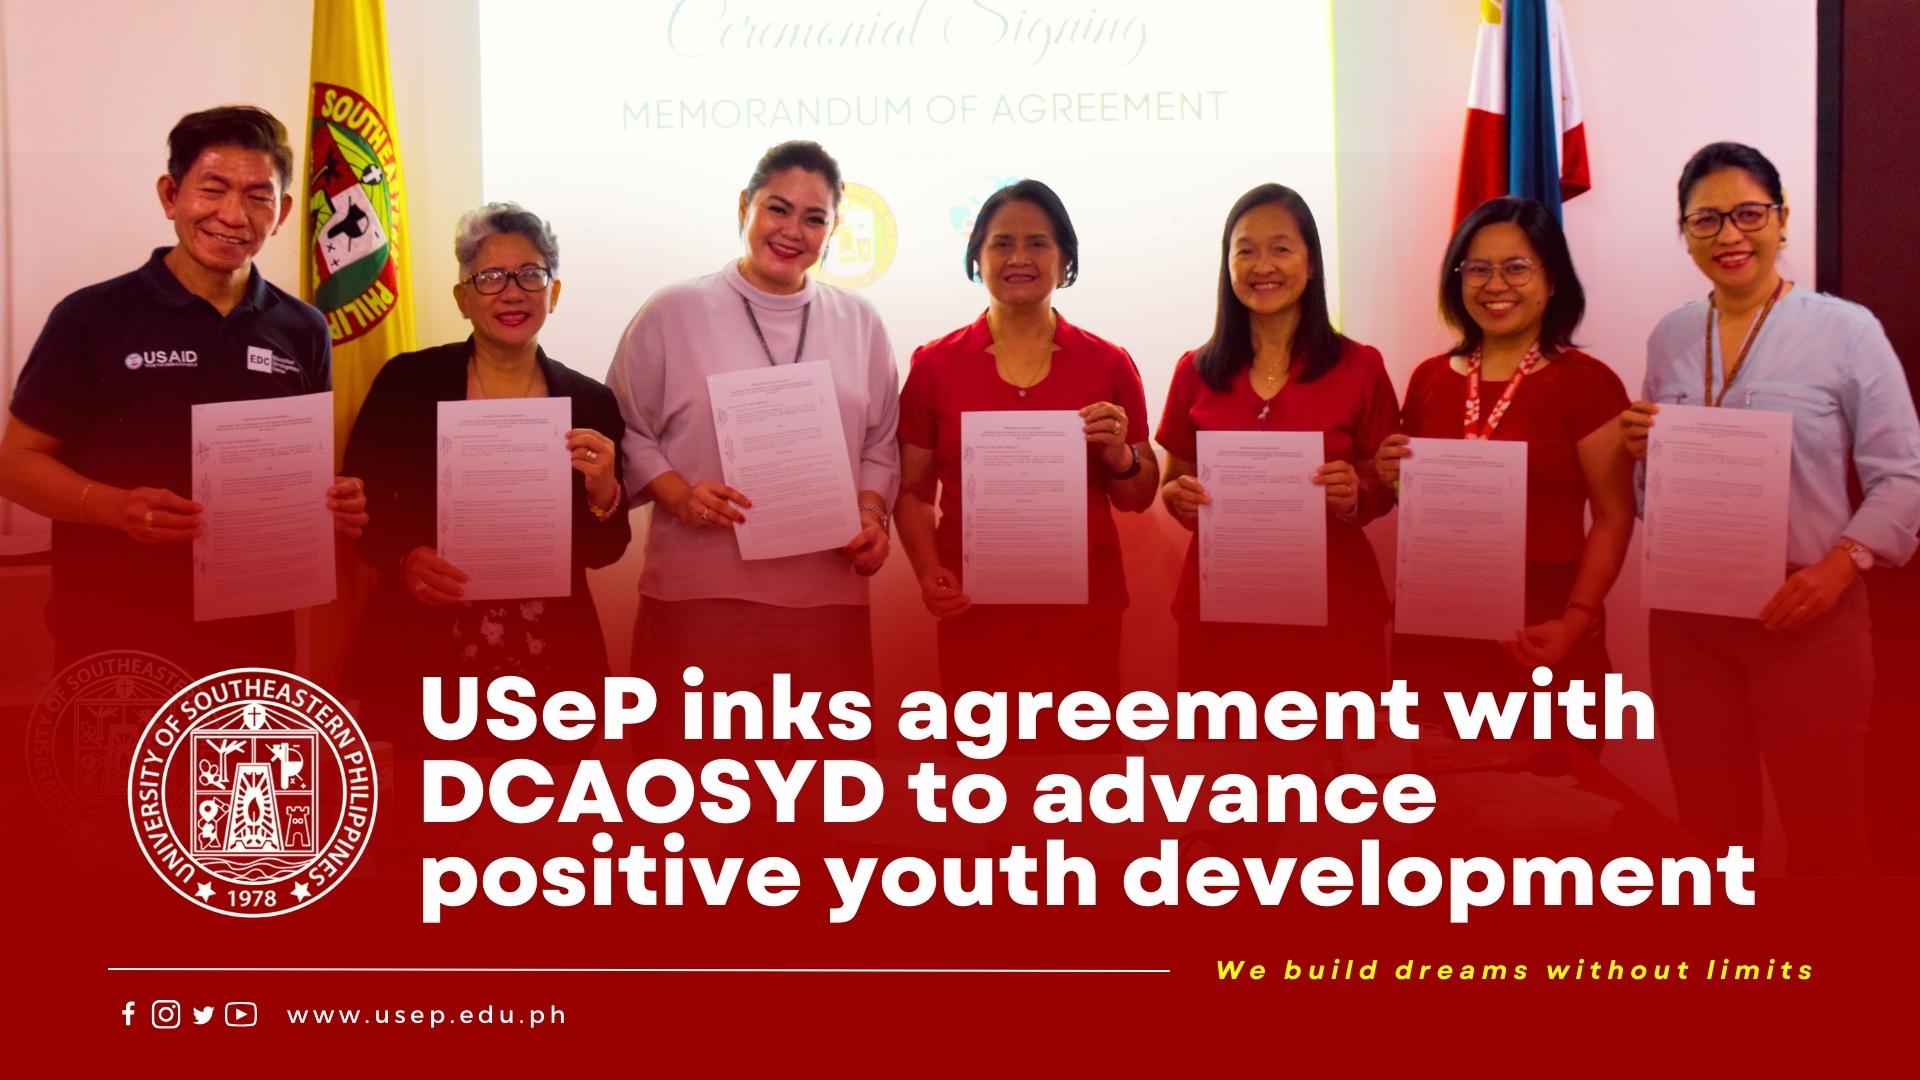 USeP inks agreement with DCAOSYD to advance positive youth development